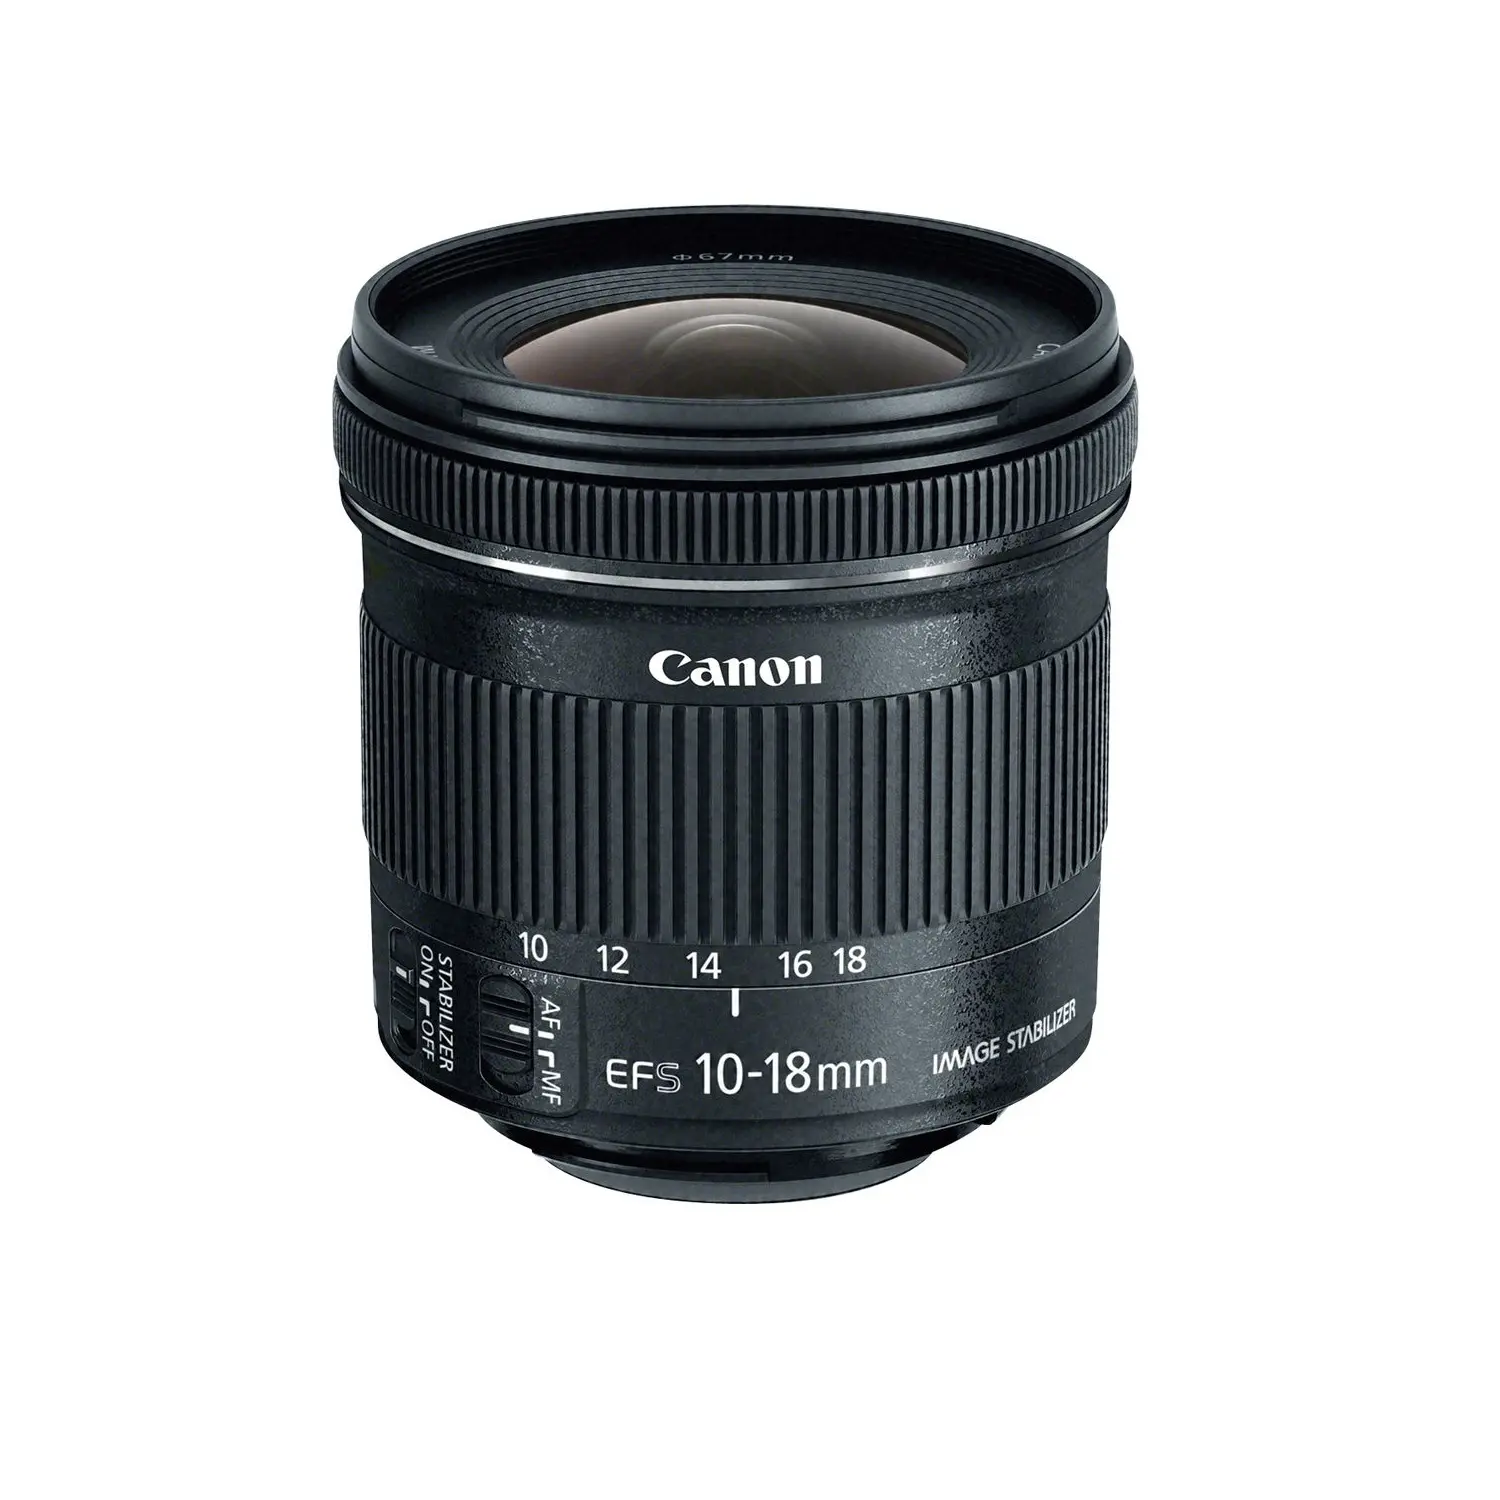 Black Color Automatic Zoom Lens 5 Blades Cano'n EF-S 10-18mm f/4.5-5.6 IS STM Lens - Black Made From Singapore